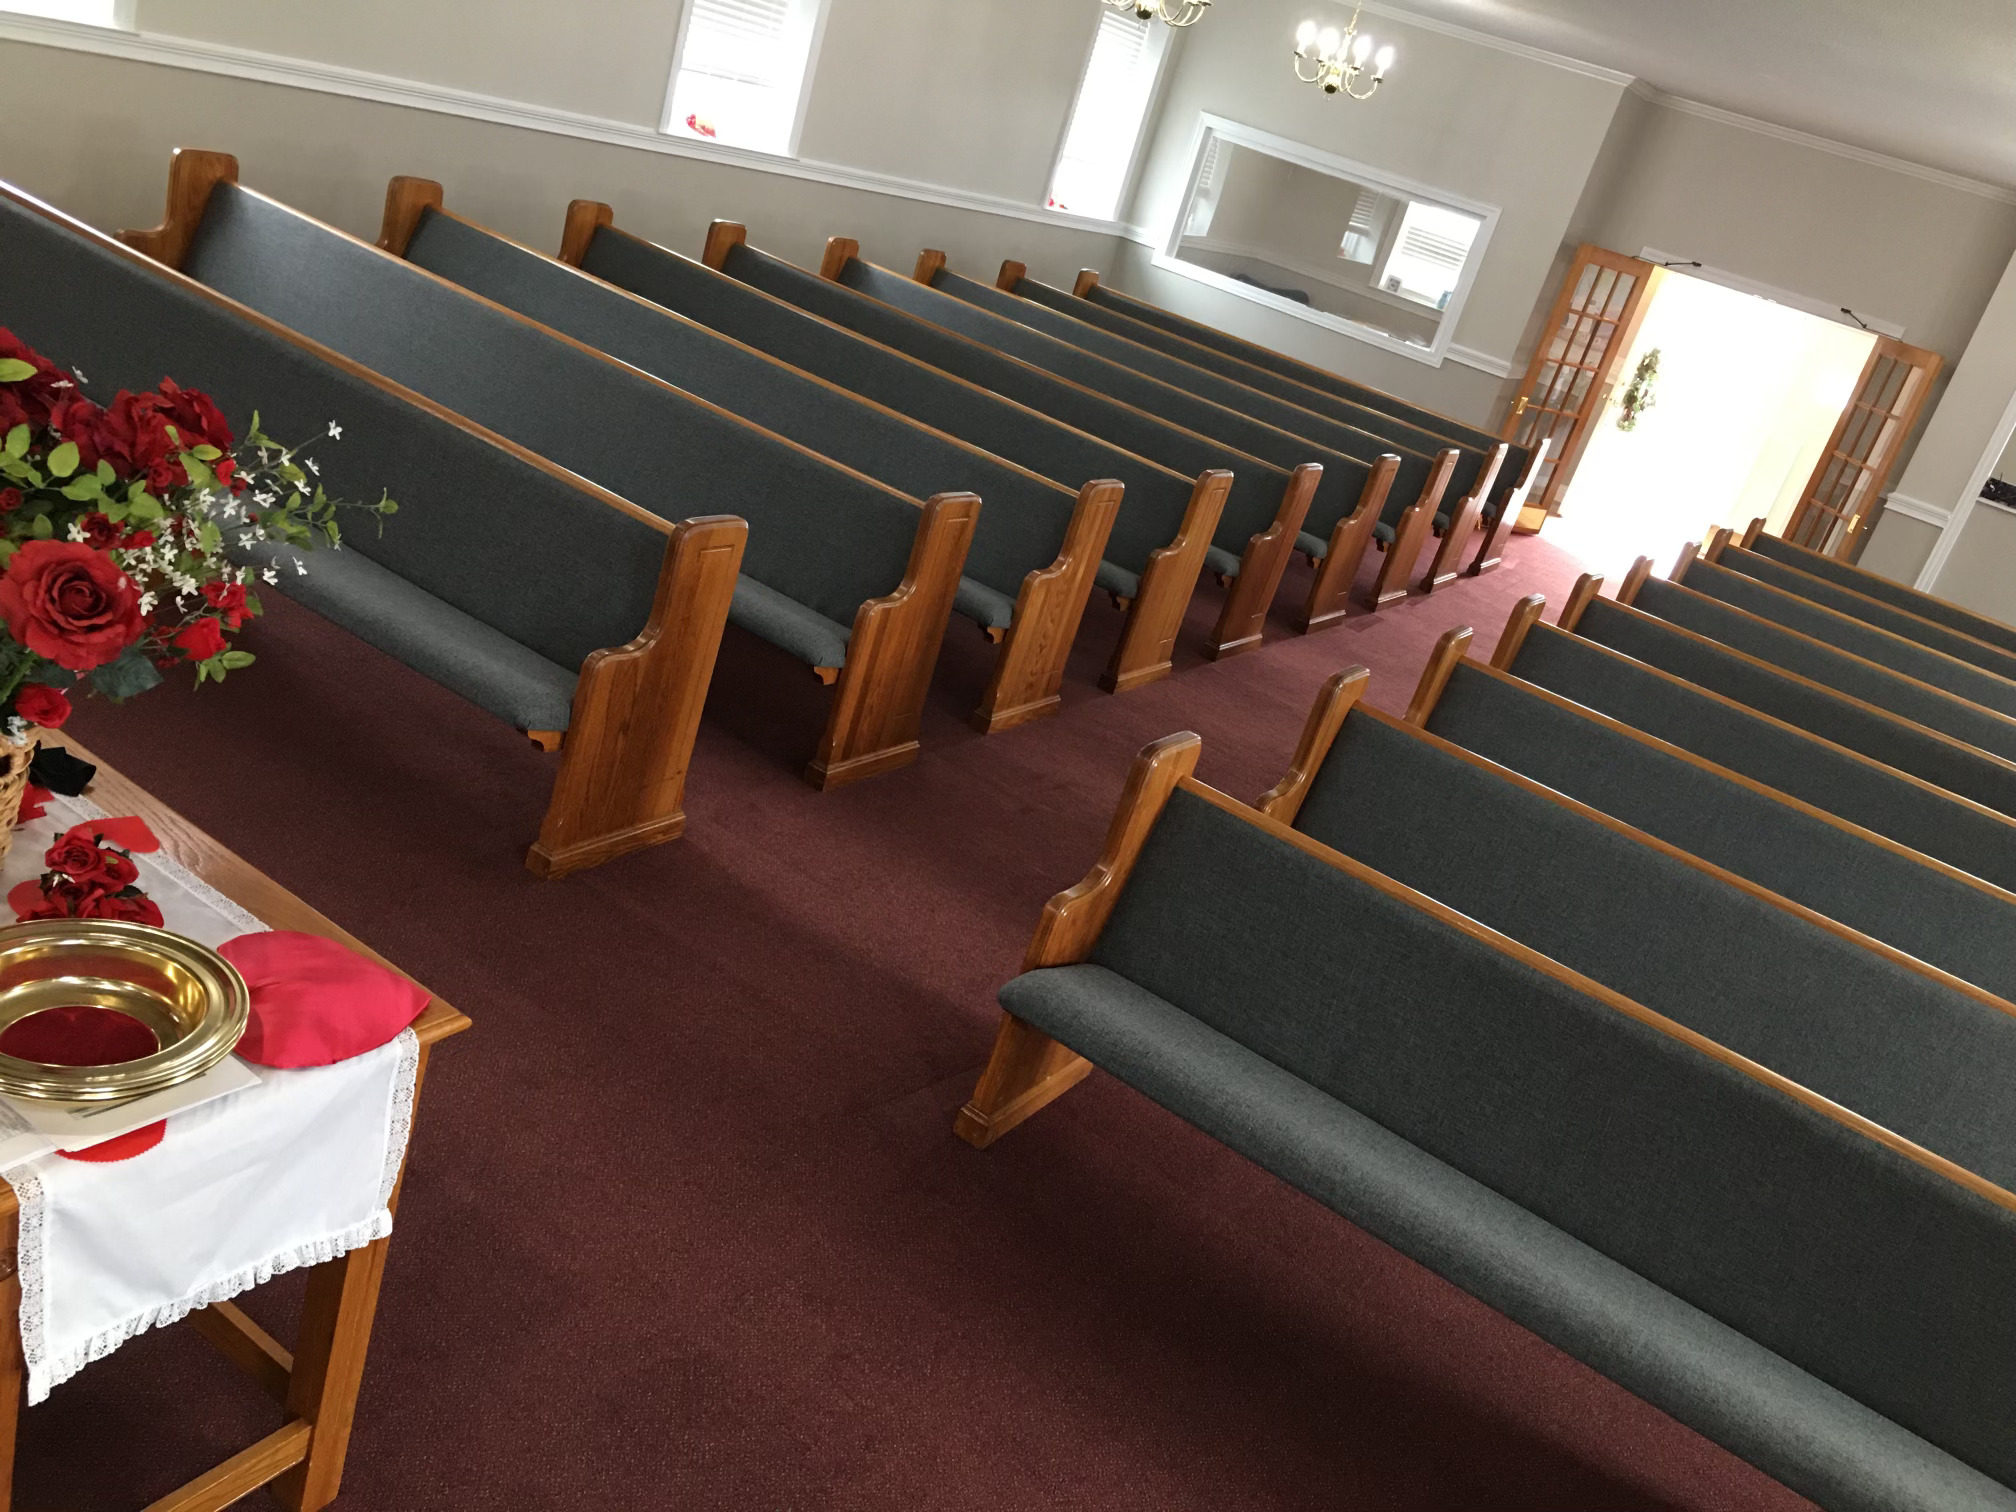 Pew Reupholstery work done by Woods Church Interiors at Solid Rock Baptist Church in Liberty, South Carolina 1288